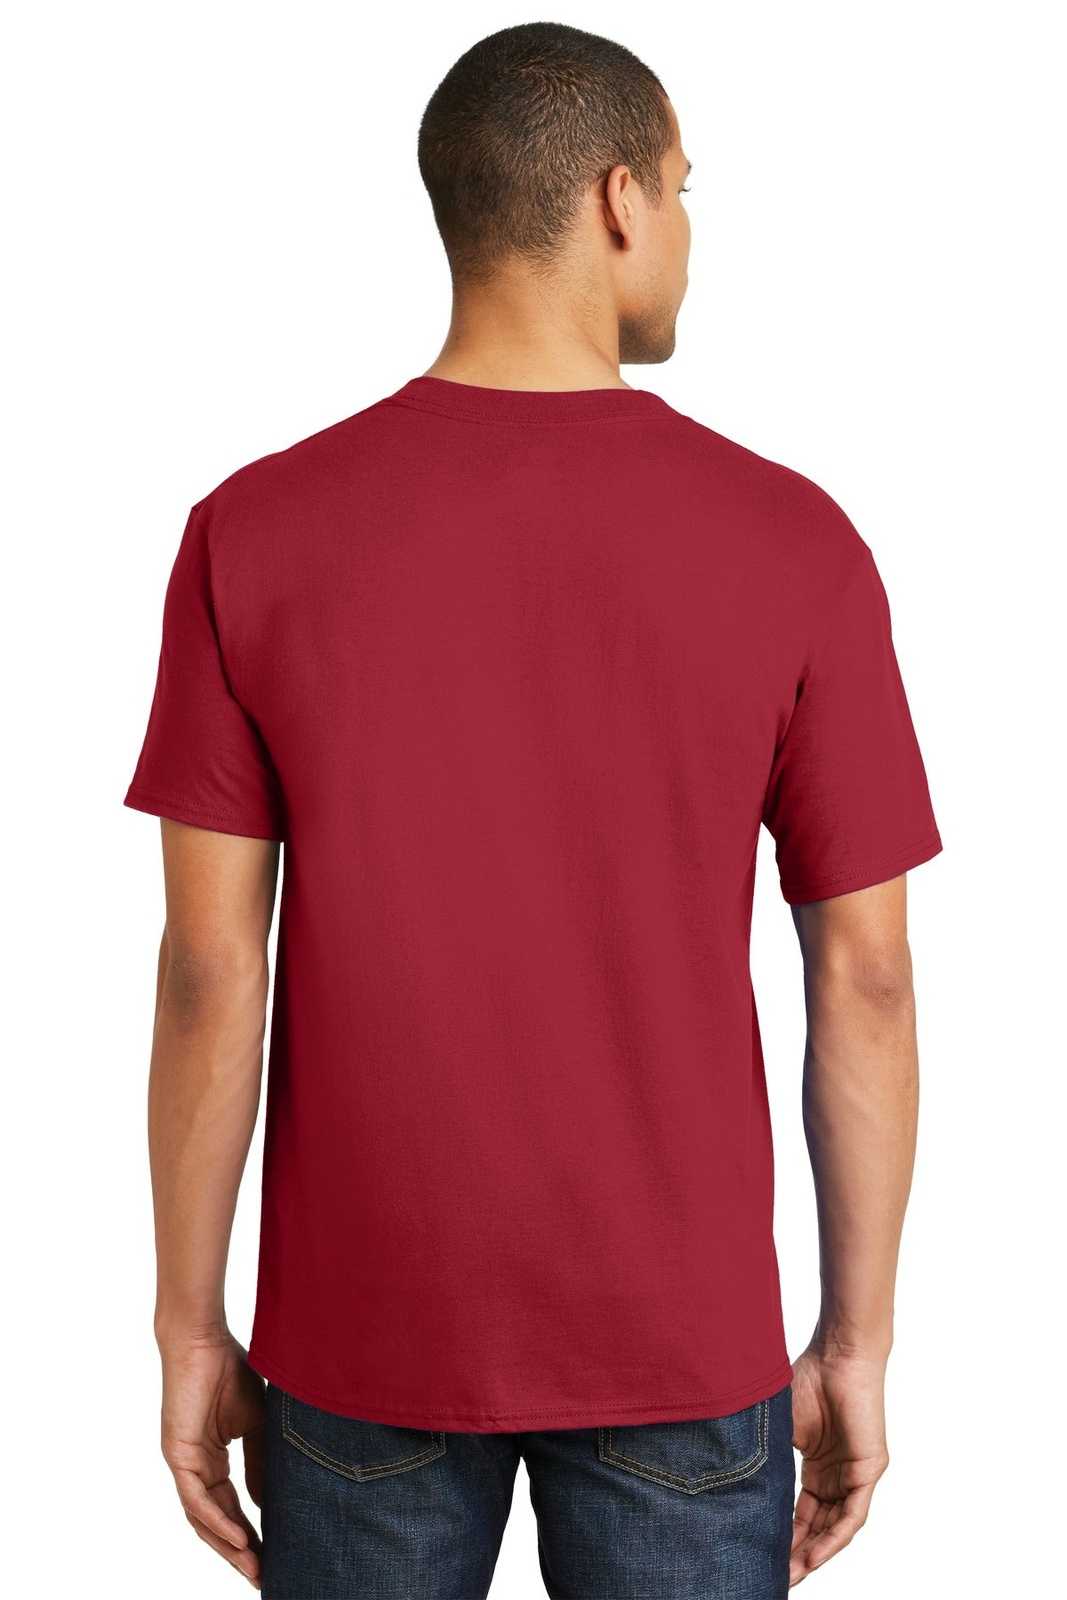 Hanes 5180 Beefy-T 100% Cotton T-Shirt - Deep Red - HIT a Double